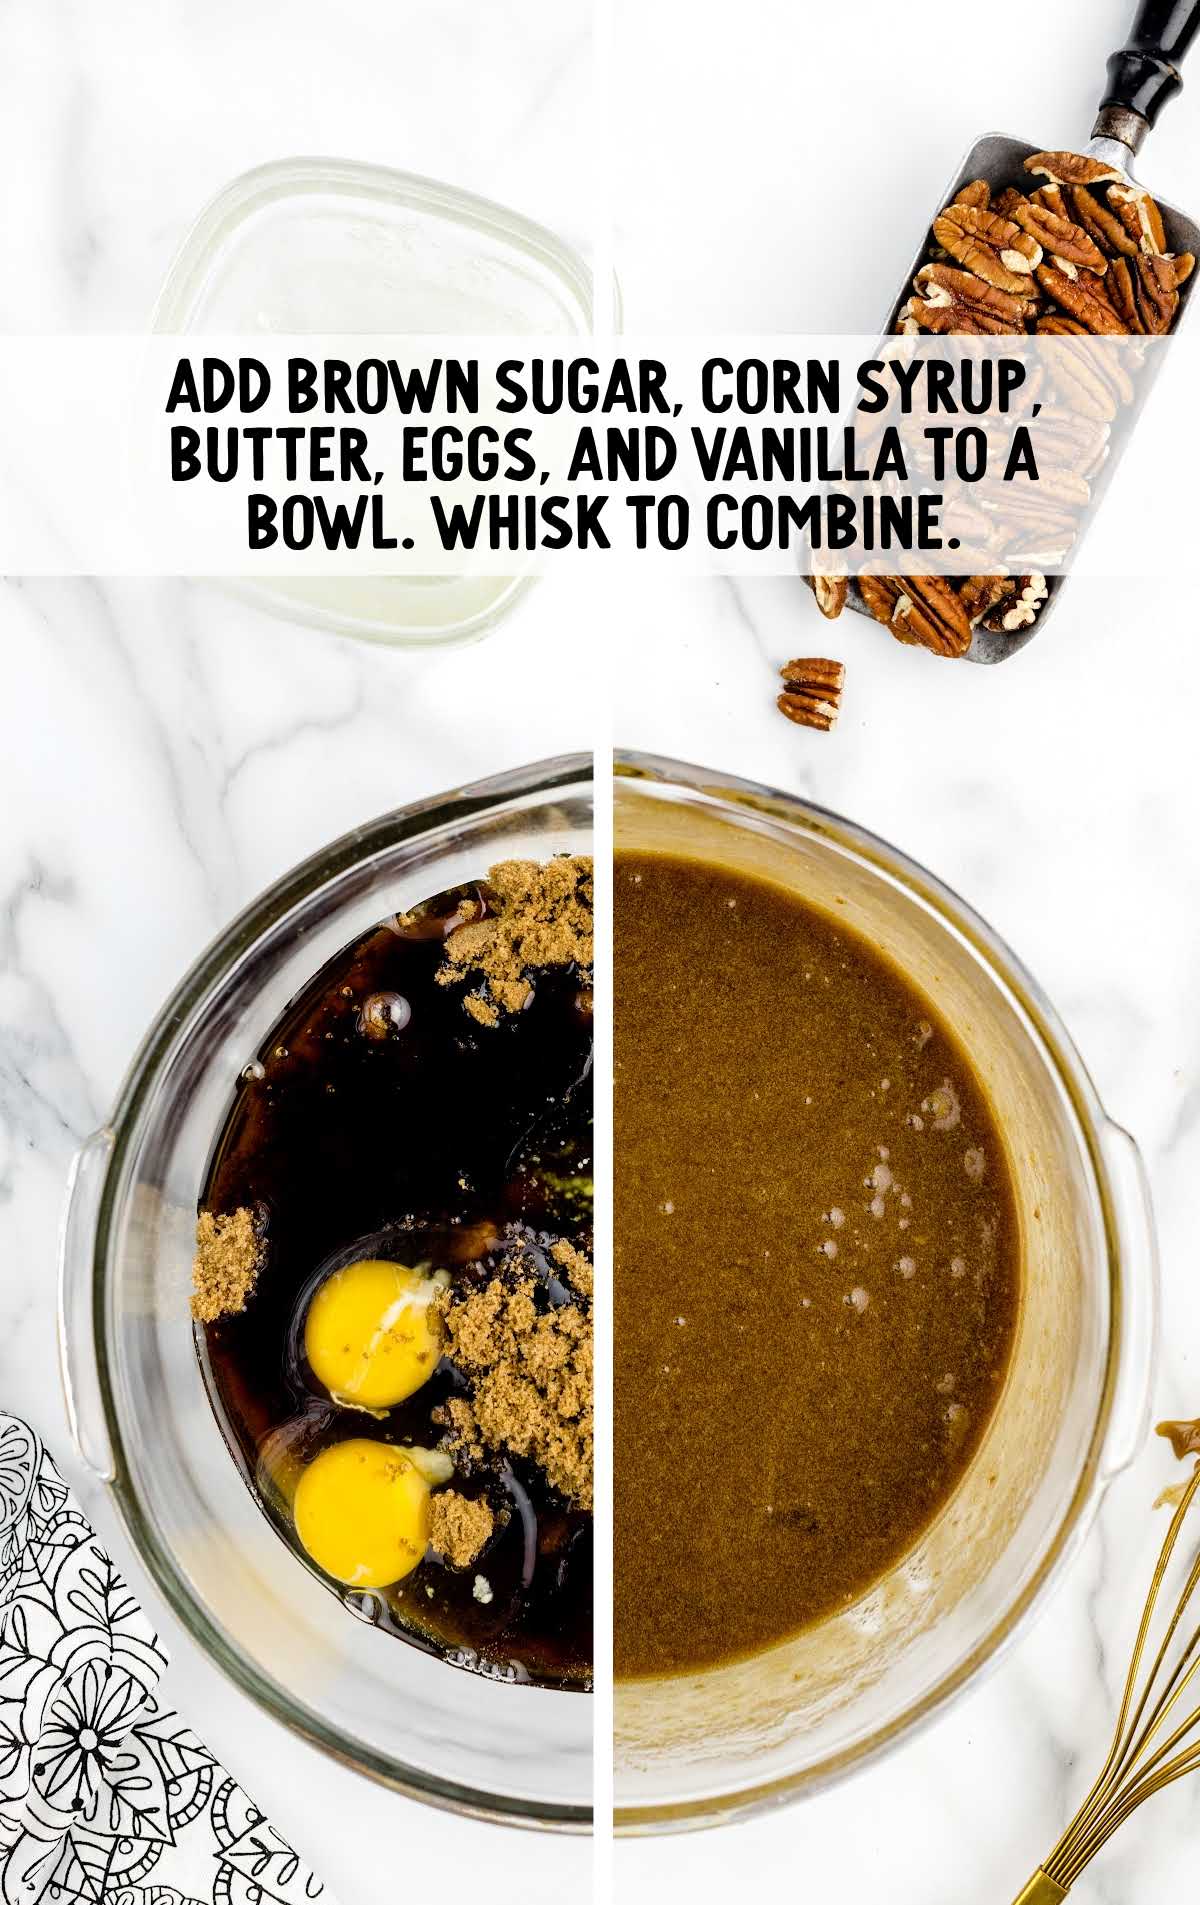 brown sugar, corn syrup, butter, eggs and vanilla added to a bowl